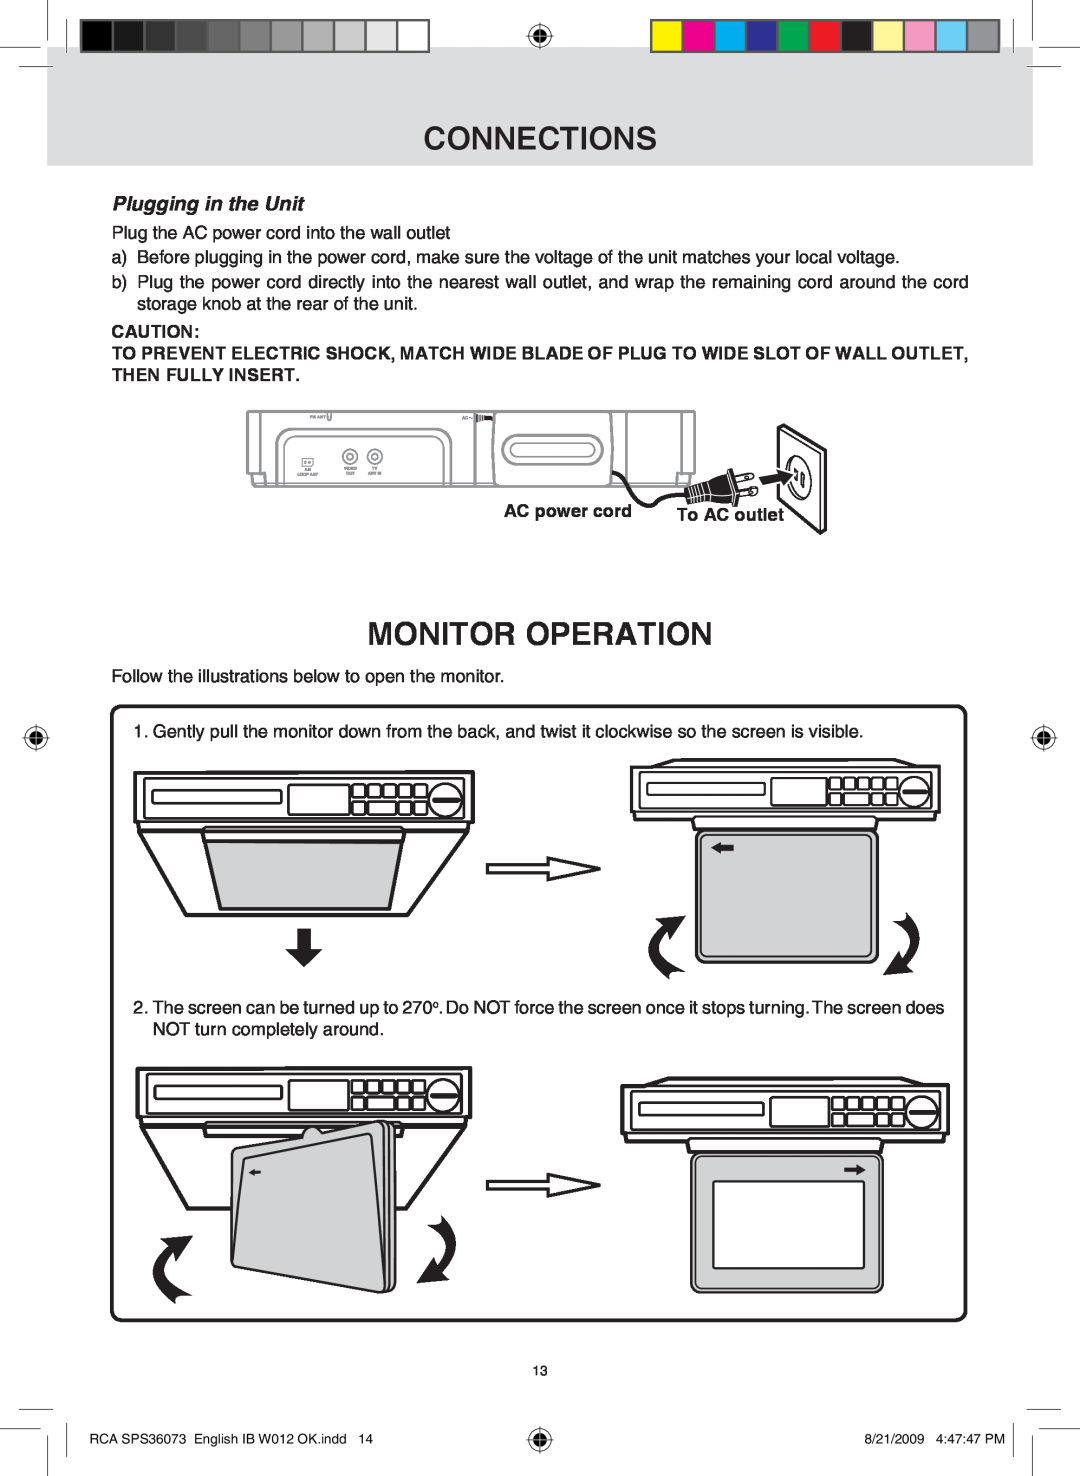 RCA SPS36073 owner manual Monitor Operation, Plugging in the Unit, connections, AC power cord 